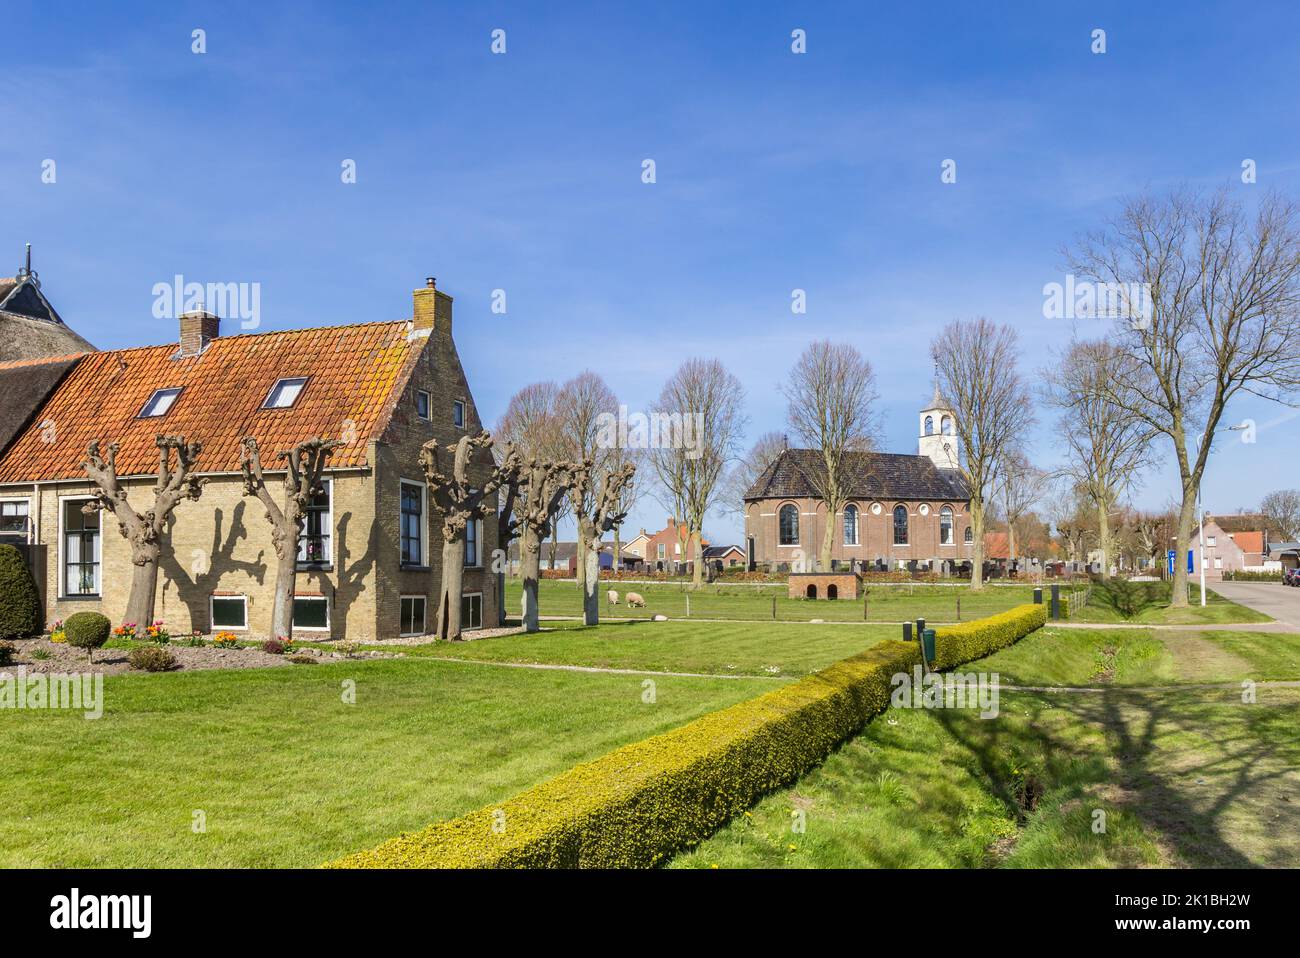 Historic farm and church in small town Sondel, Netherlands Stock Photo